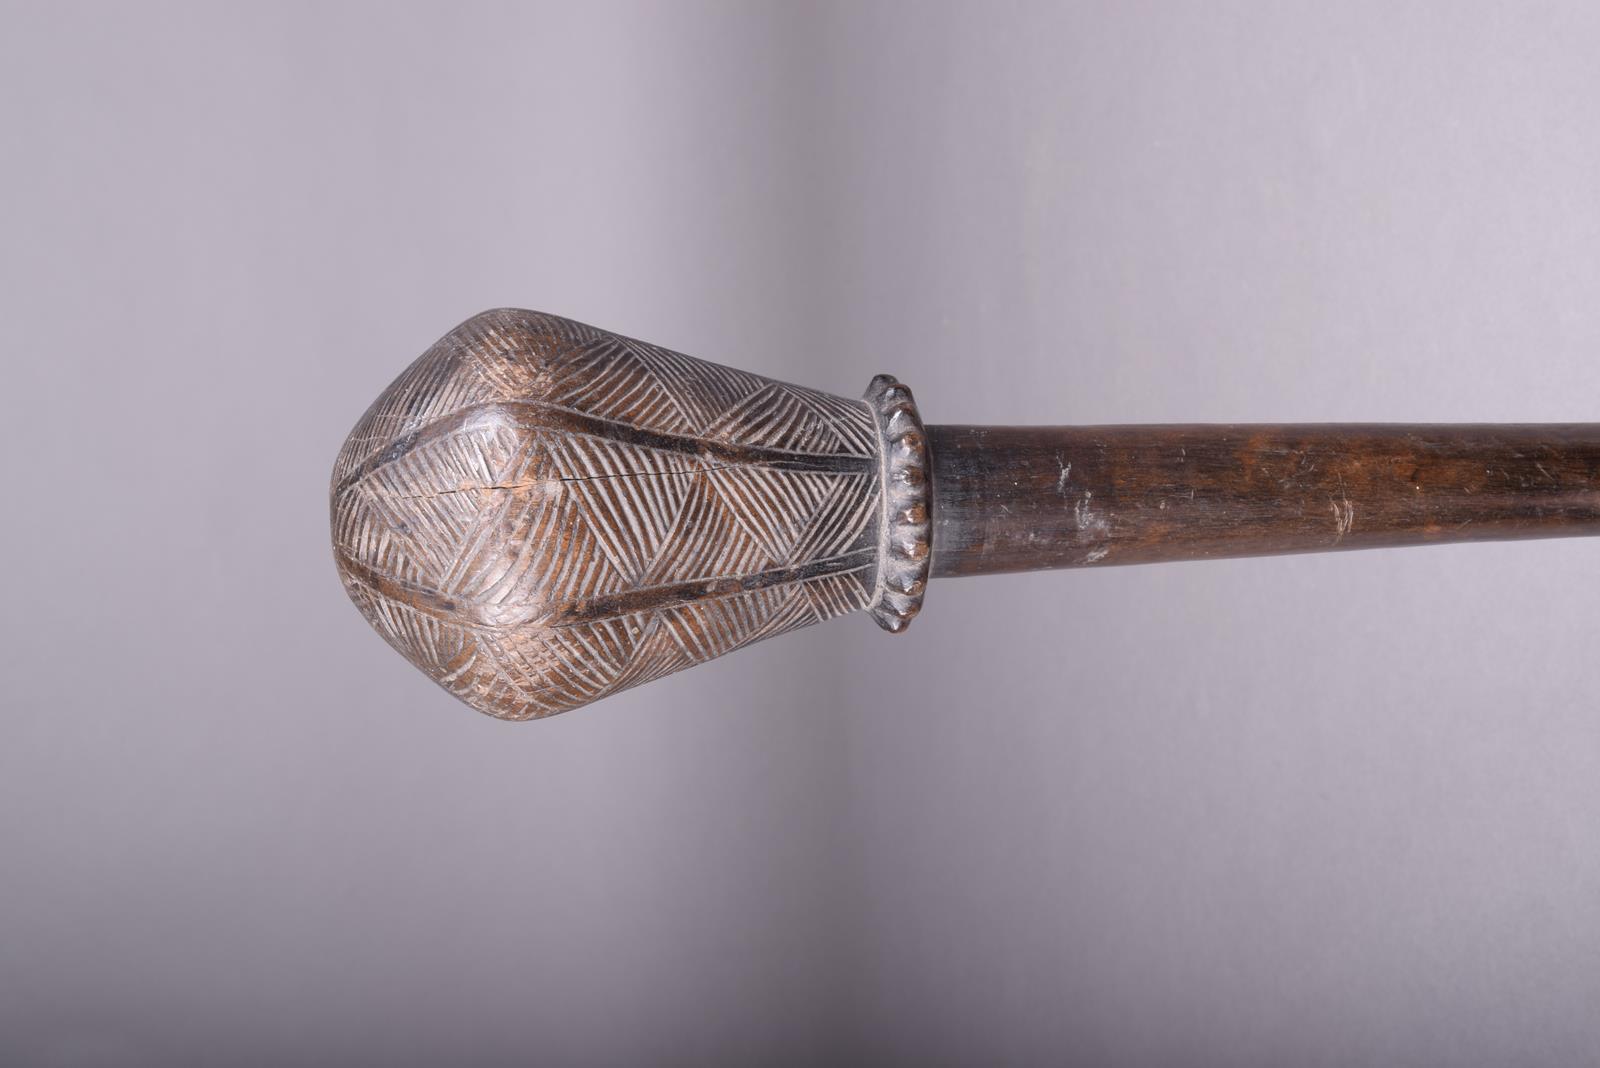 A Chokwe staff, Angola, with a pear shape head with incised band decoration, with a beaded collar, - Image 3 of 6